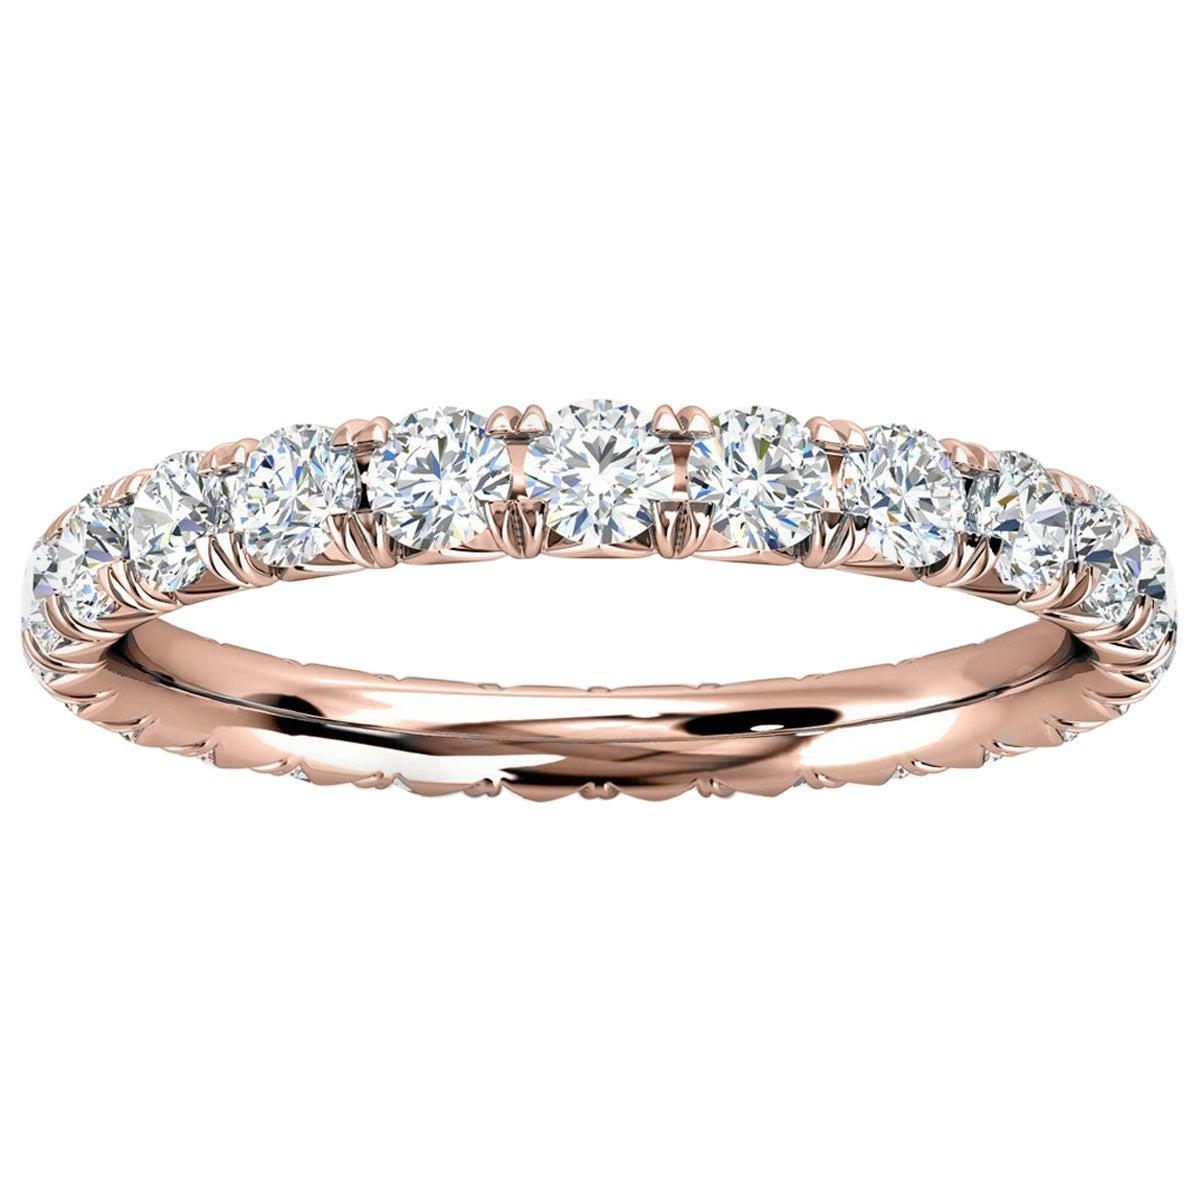 For Sale:  14k Rose Gold Mia French Pave Diamond Eternity Ring '1 Ct. tw'